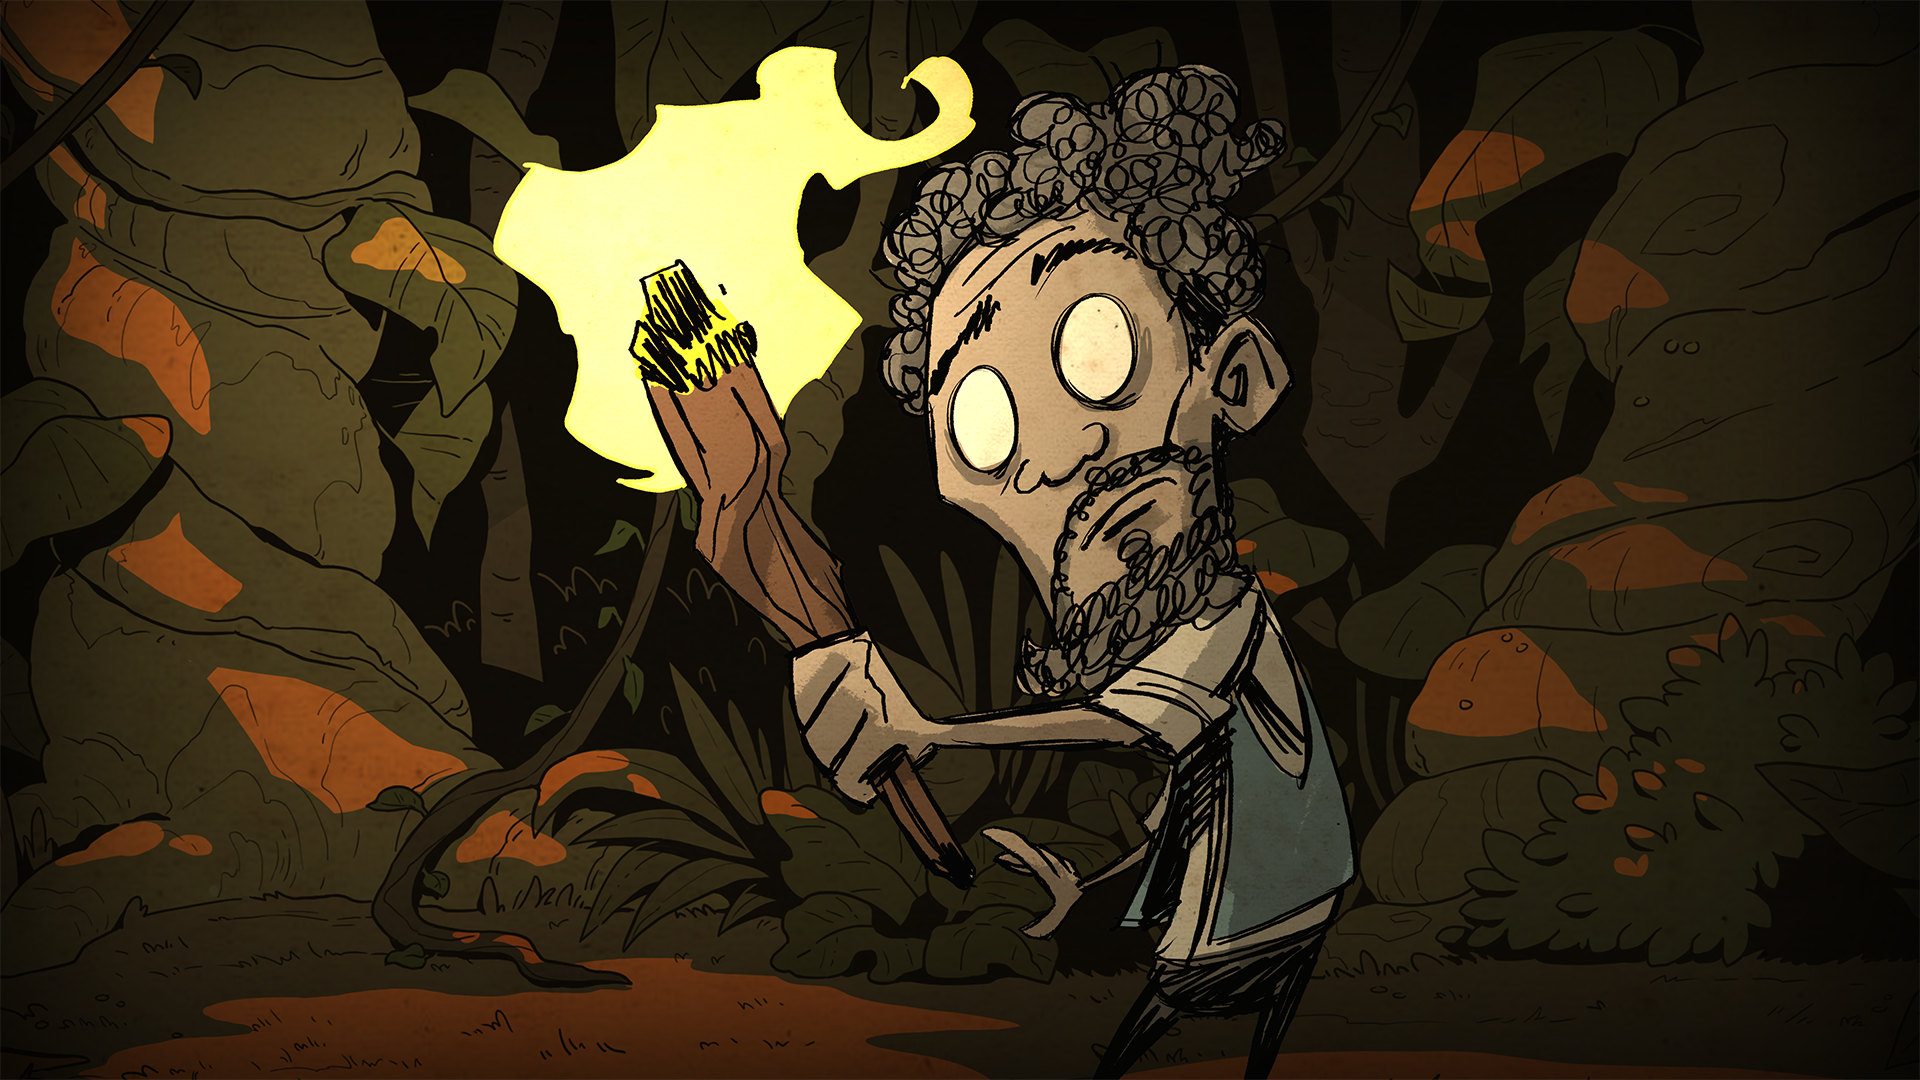 Dont que. Варли донт старв. Don't Starve together Варли. Варли don't Starve арт. ДСТ don't Starve together.